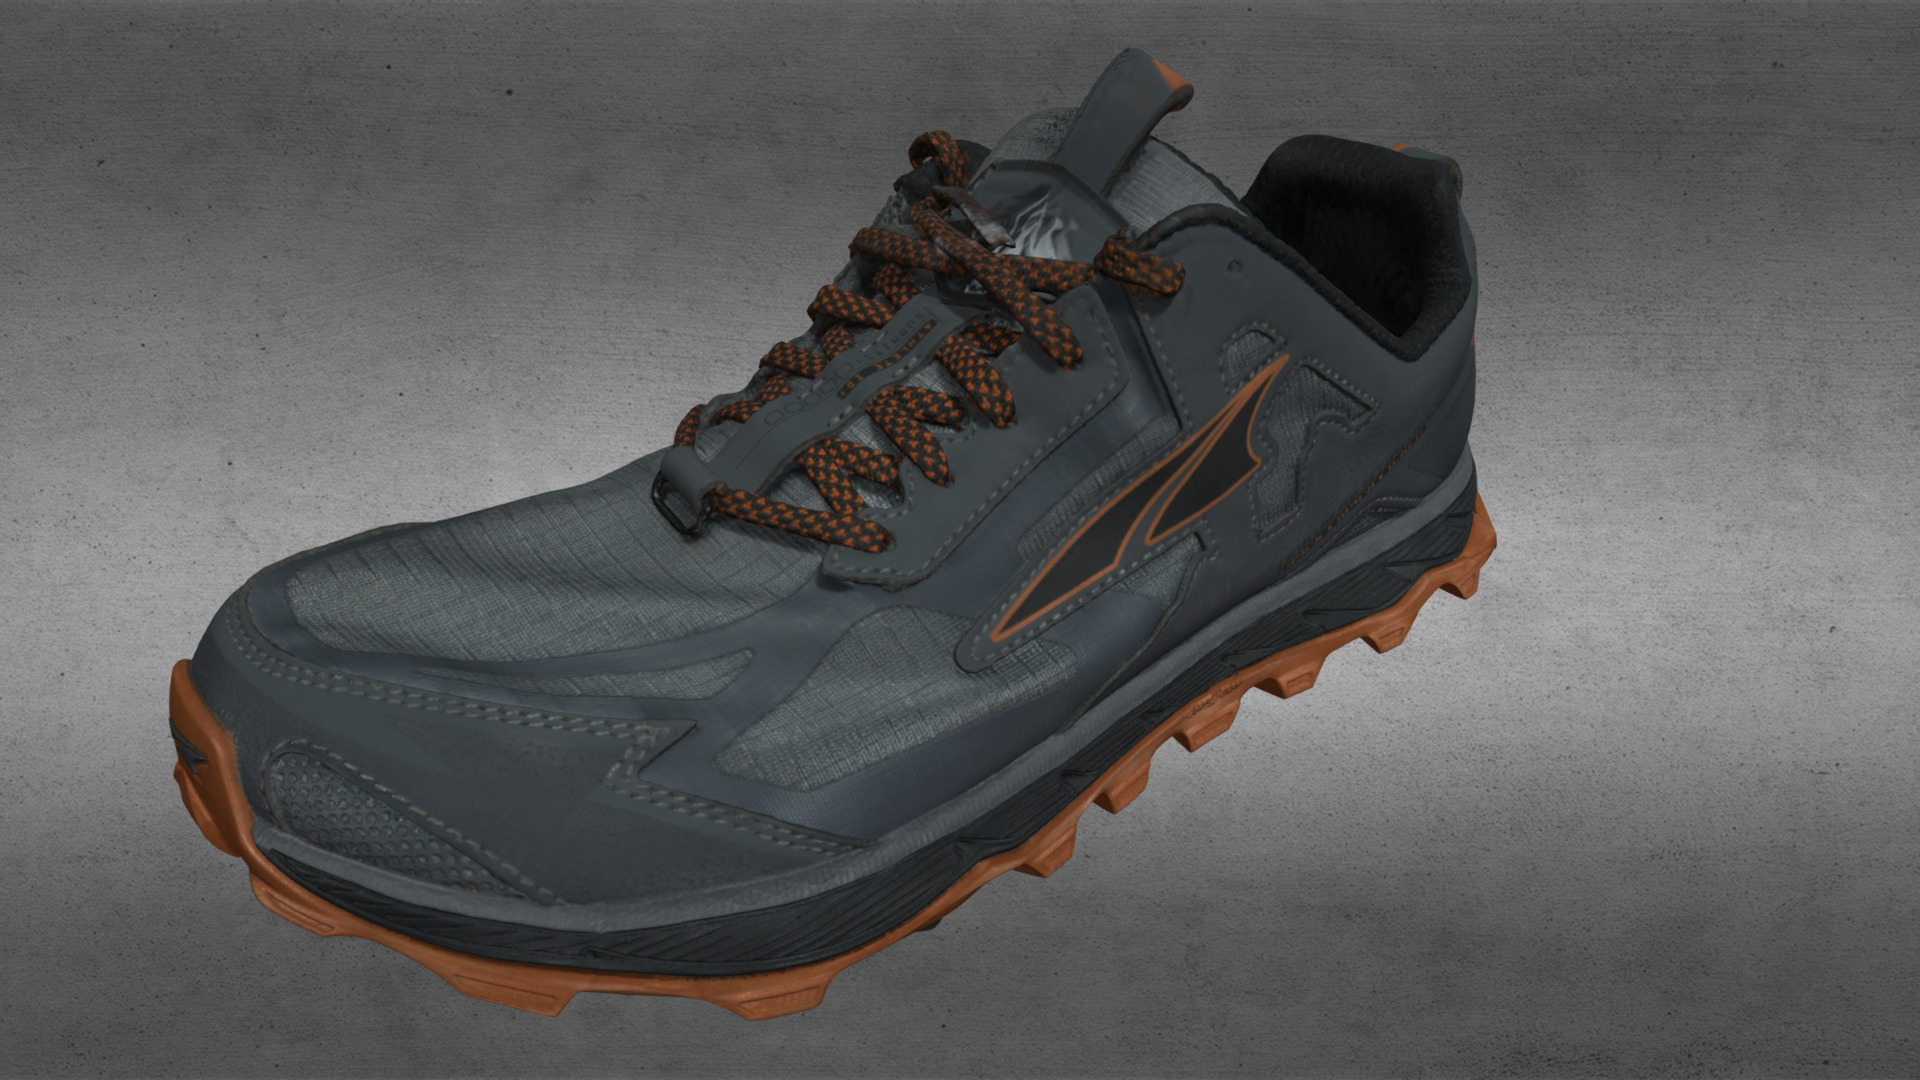 3D model Altra Lone Peak 4.5 - This is a 3D model of the Altra Lone Peak 4.5. The 3D model is about a pair of shoes.